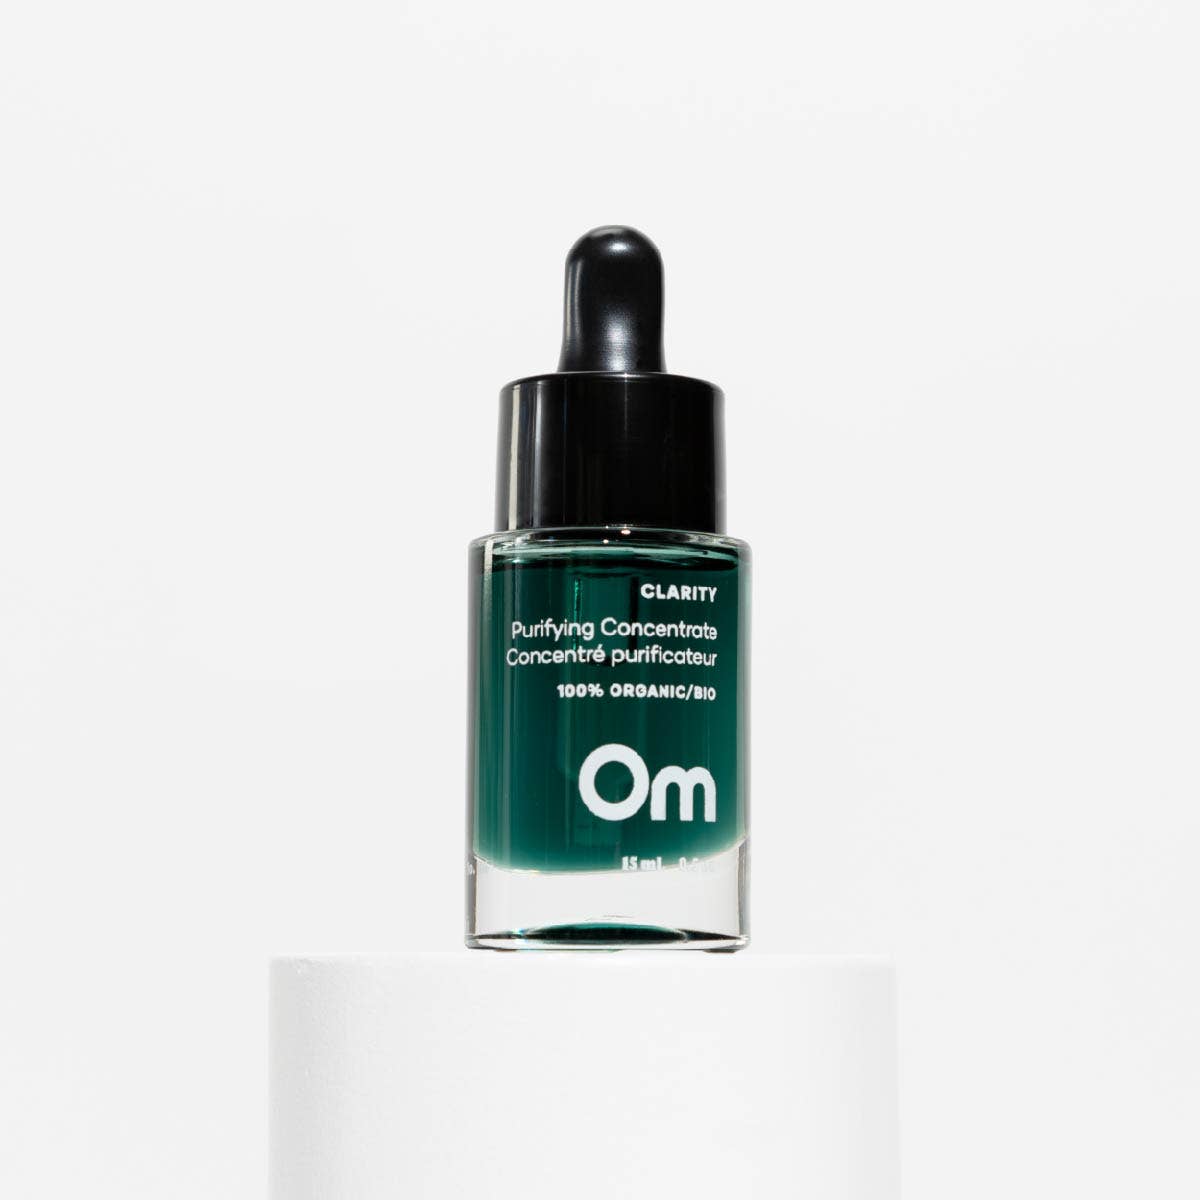 Clarity Purifying Concentrate